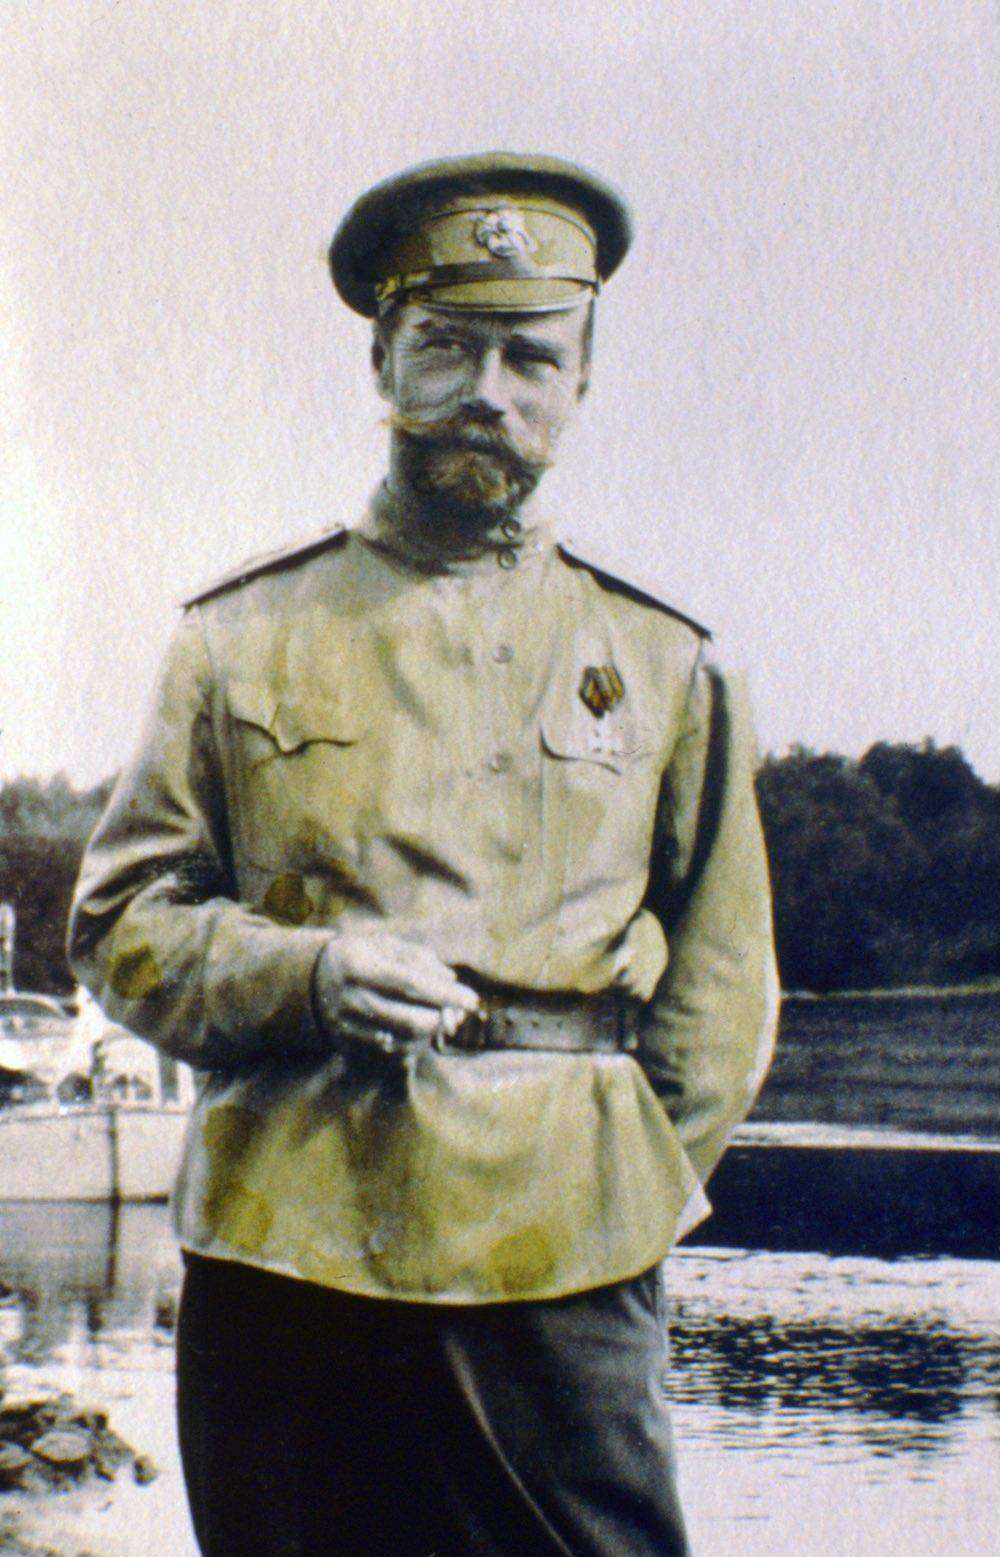 1915: Tsar Nicholas II. The series of the unique pictures were taken by the Tsar Nicholas II himself or people close to the royal family. They were realized in 1915-1916, the most terrible years of World War I. Nicholas II was an insatiable photographer. He took special care of pictures, filed them with care in numerous albums. He passed down his love for photography to Maria, his third daughter, who is responsible for colouring most of the pictures. (Photo: Laski Diffusion/Getty Images)